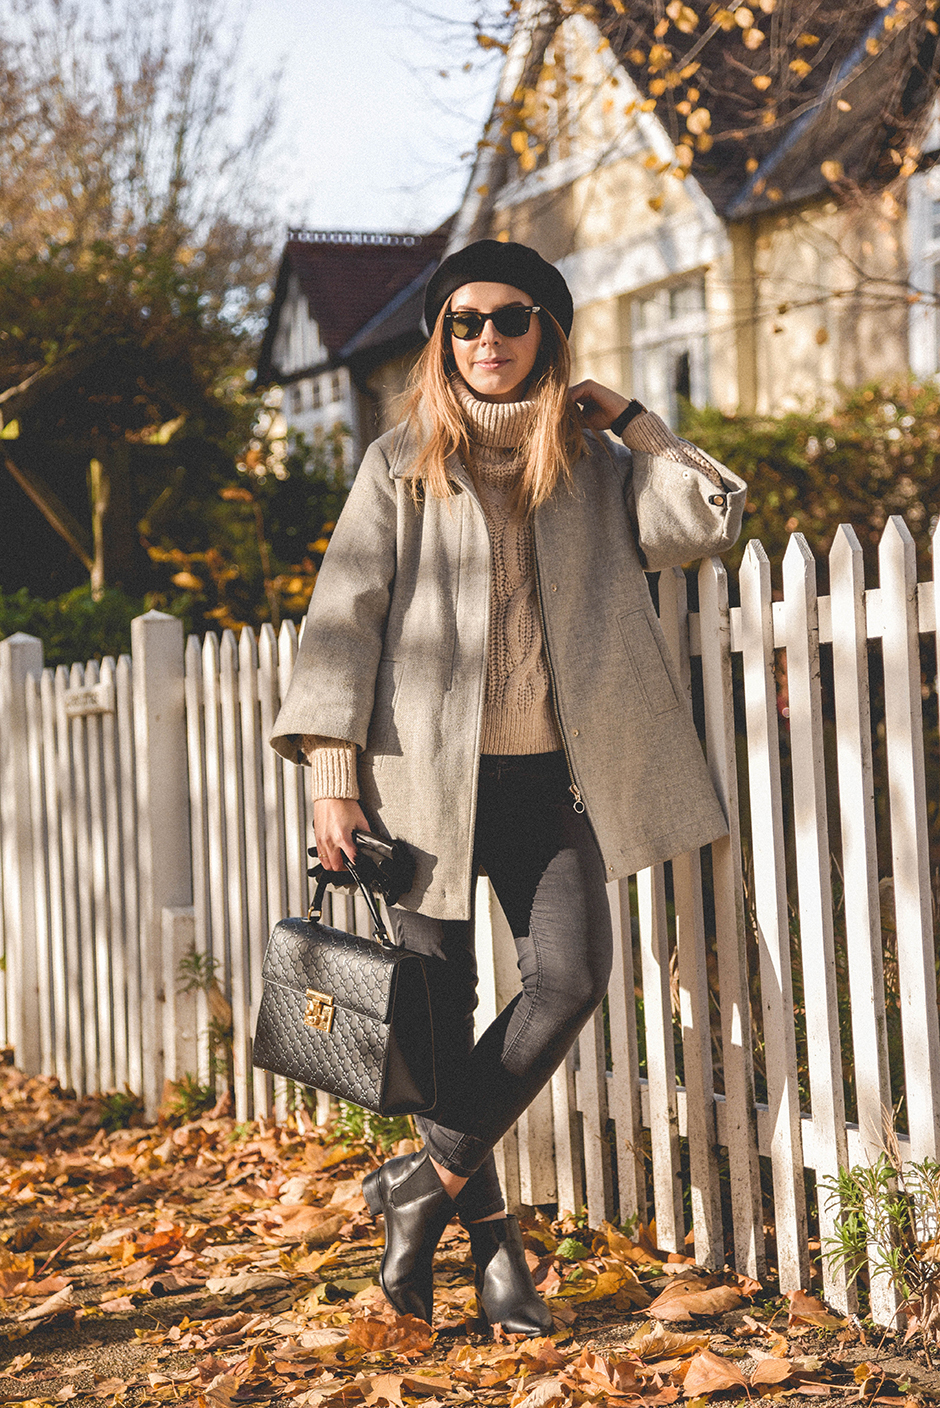 CASUAL DAY IN THE NEIGHBOURHOOD - LOOK OF THE AUTUMN | MAKES IT SIMPLE 